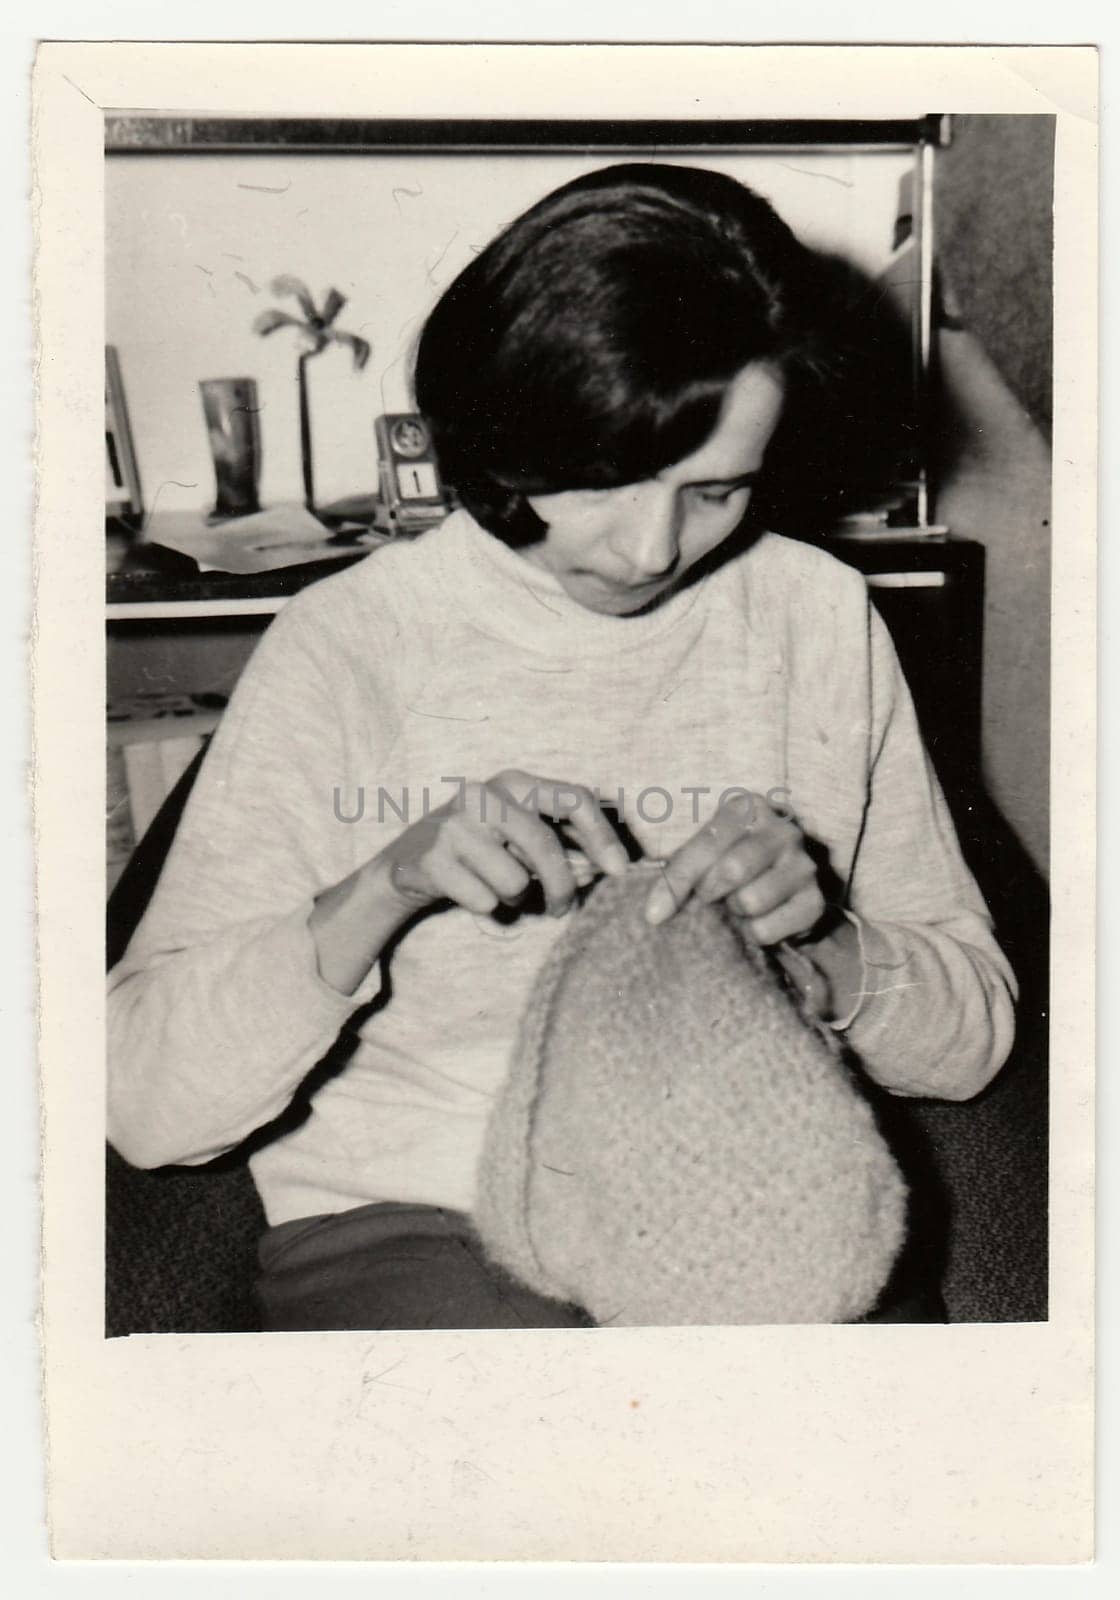 Vintage photo shows woman knits a cap. by roman_nerud